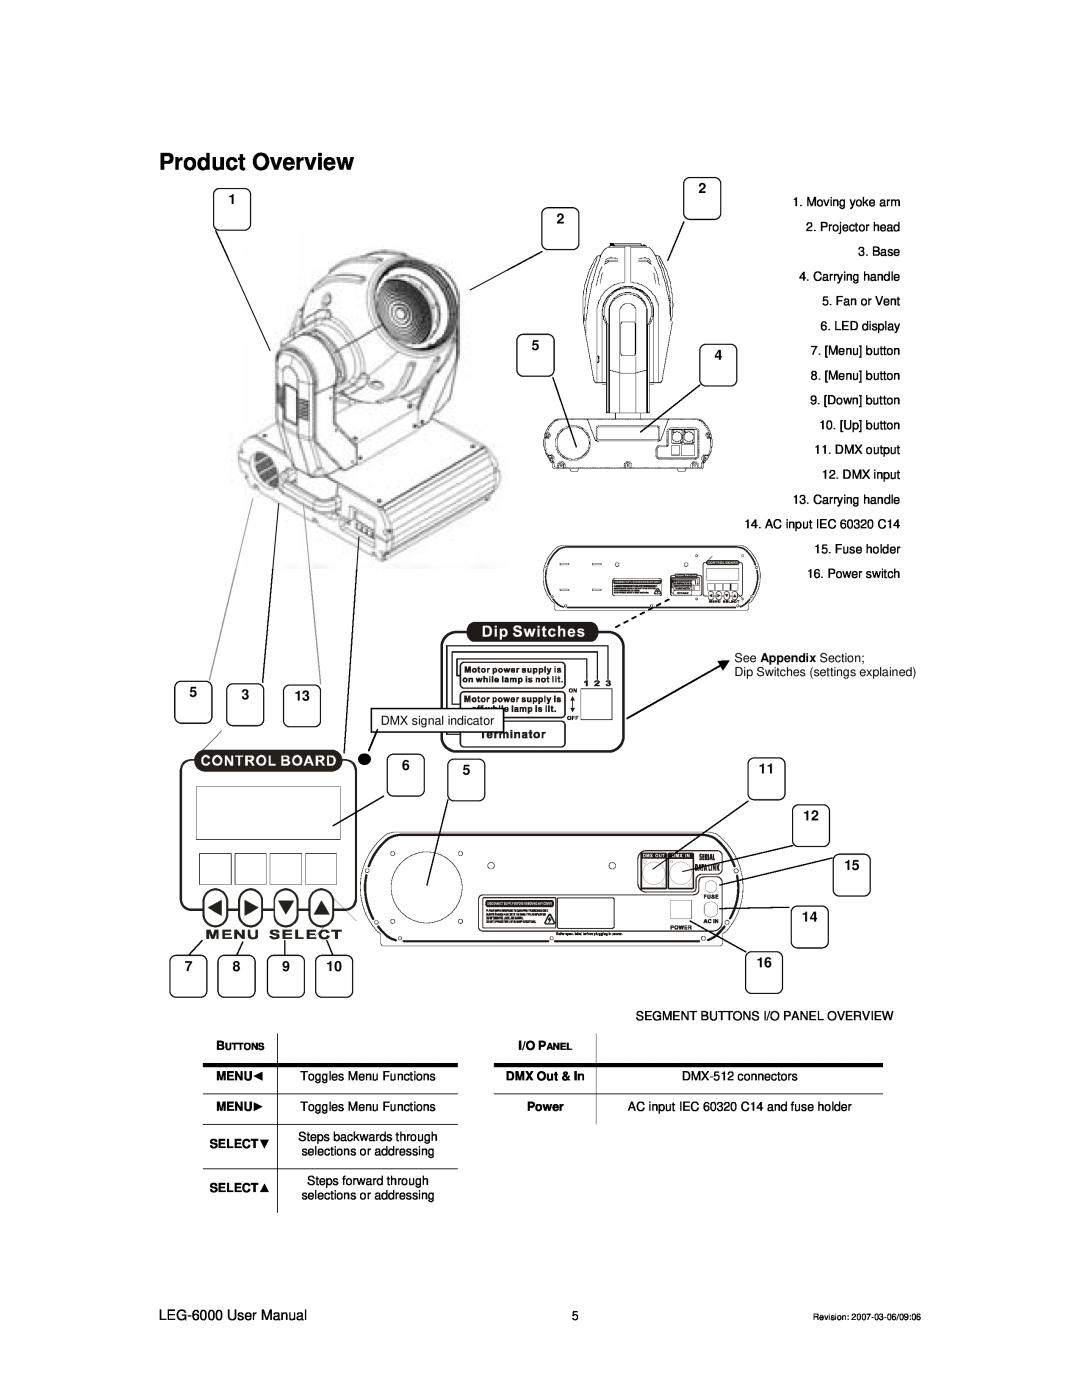 Chauvet 6000X, LEG-6000 user manual Product Overview, 1 2 5 